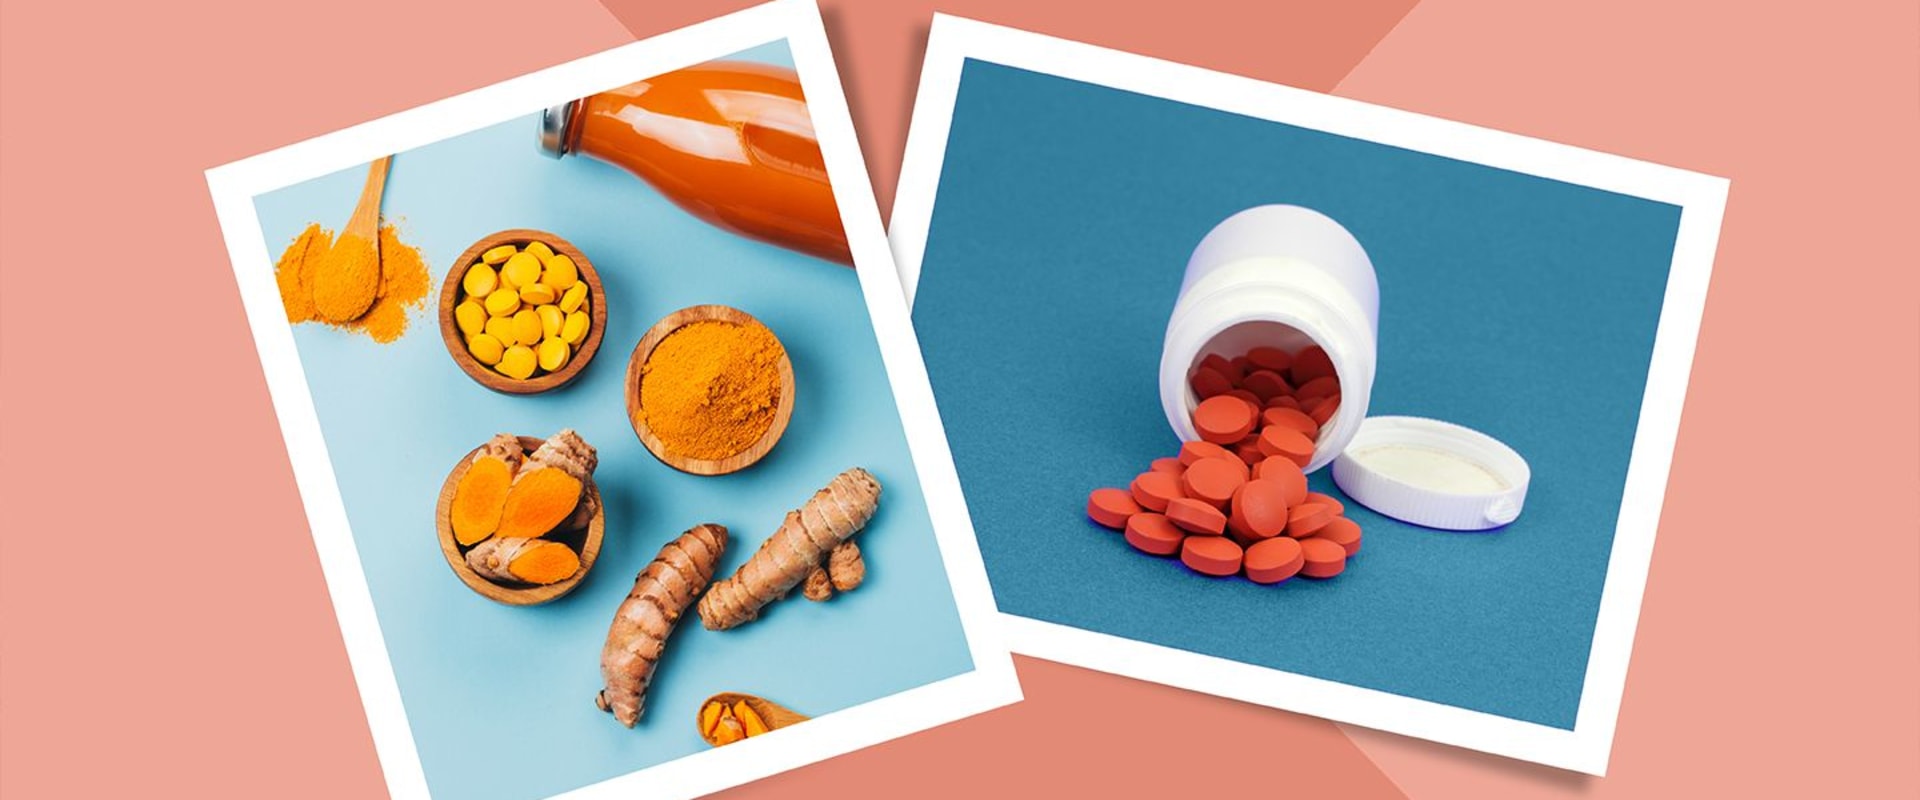 What supplement has the most drug interactions?